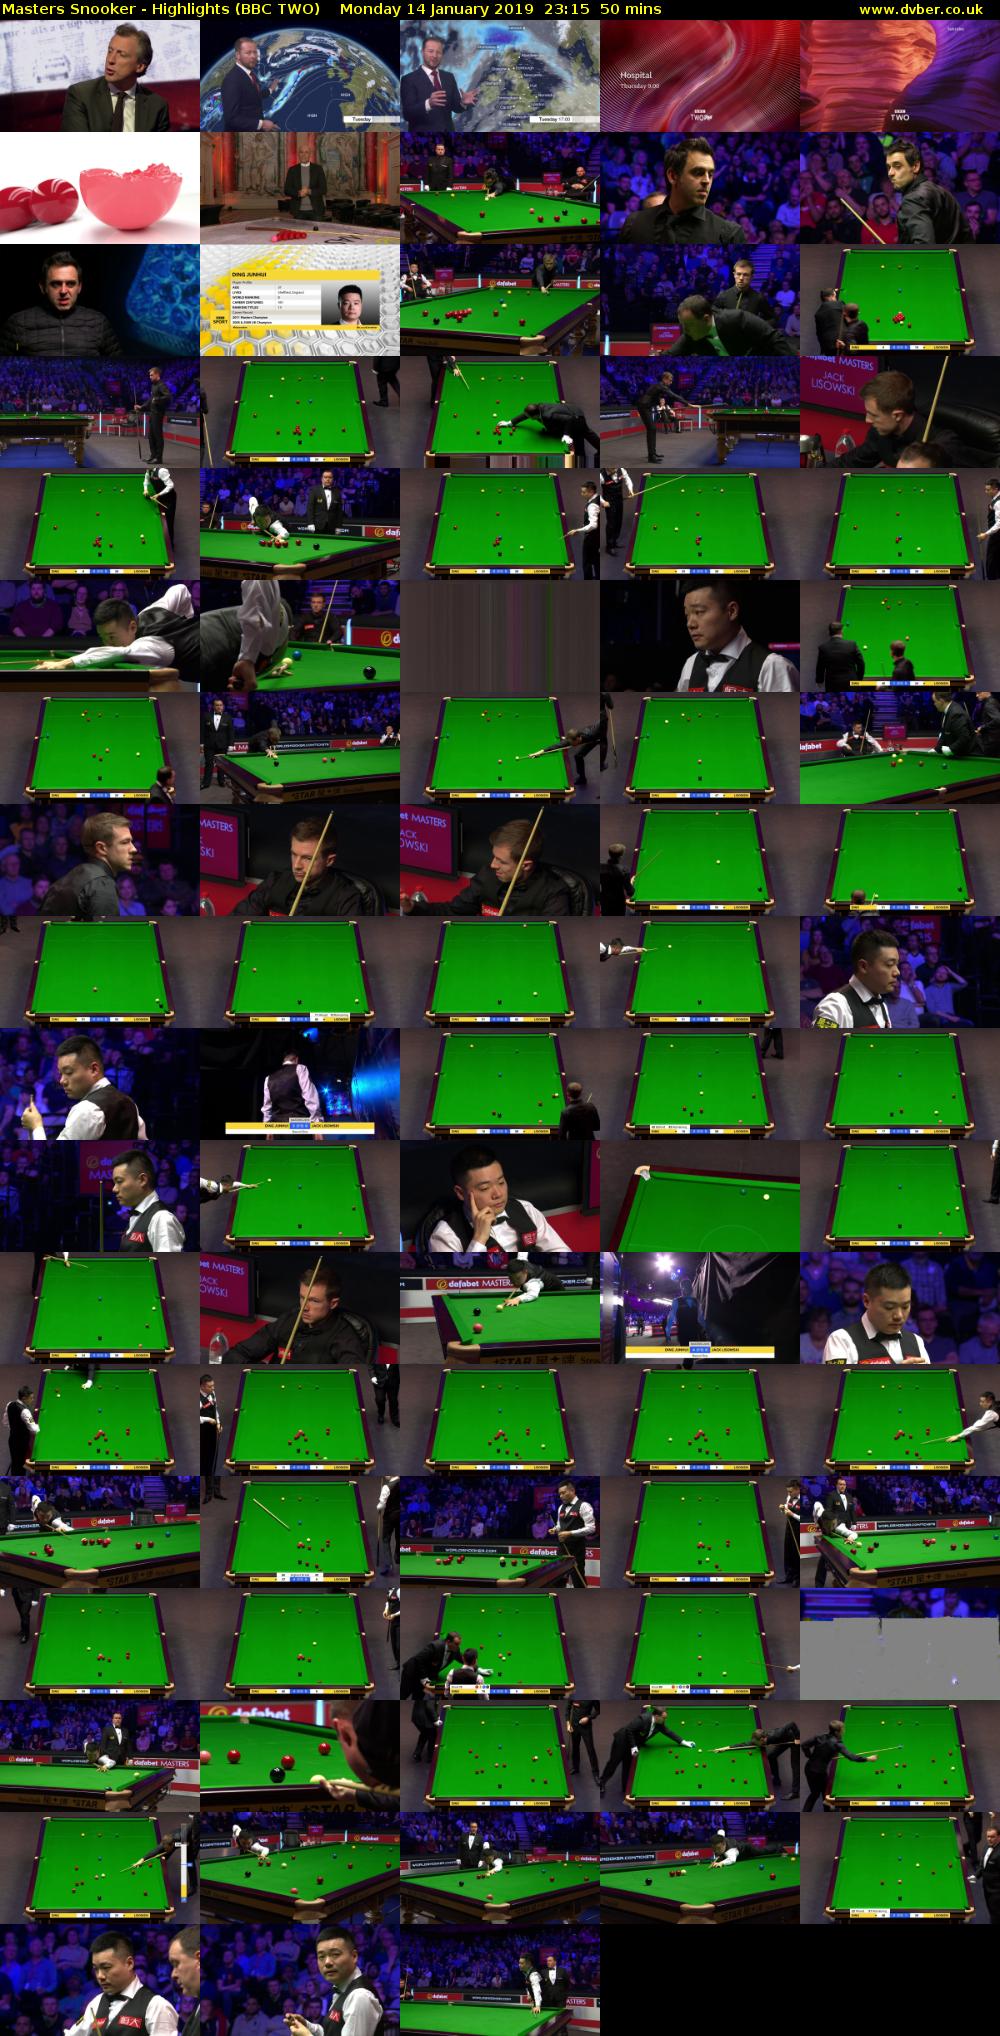 Masters Snooker - Highlights (BBC TWO) Monday 14 January 2019 23:15 - 00:05